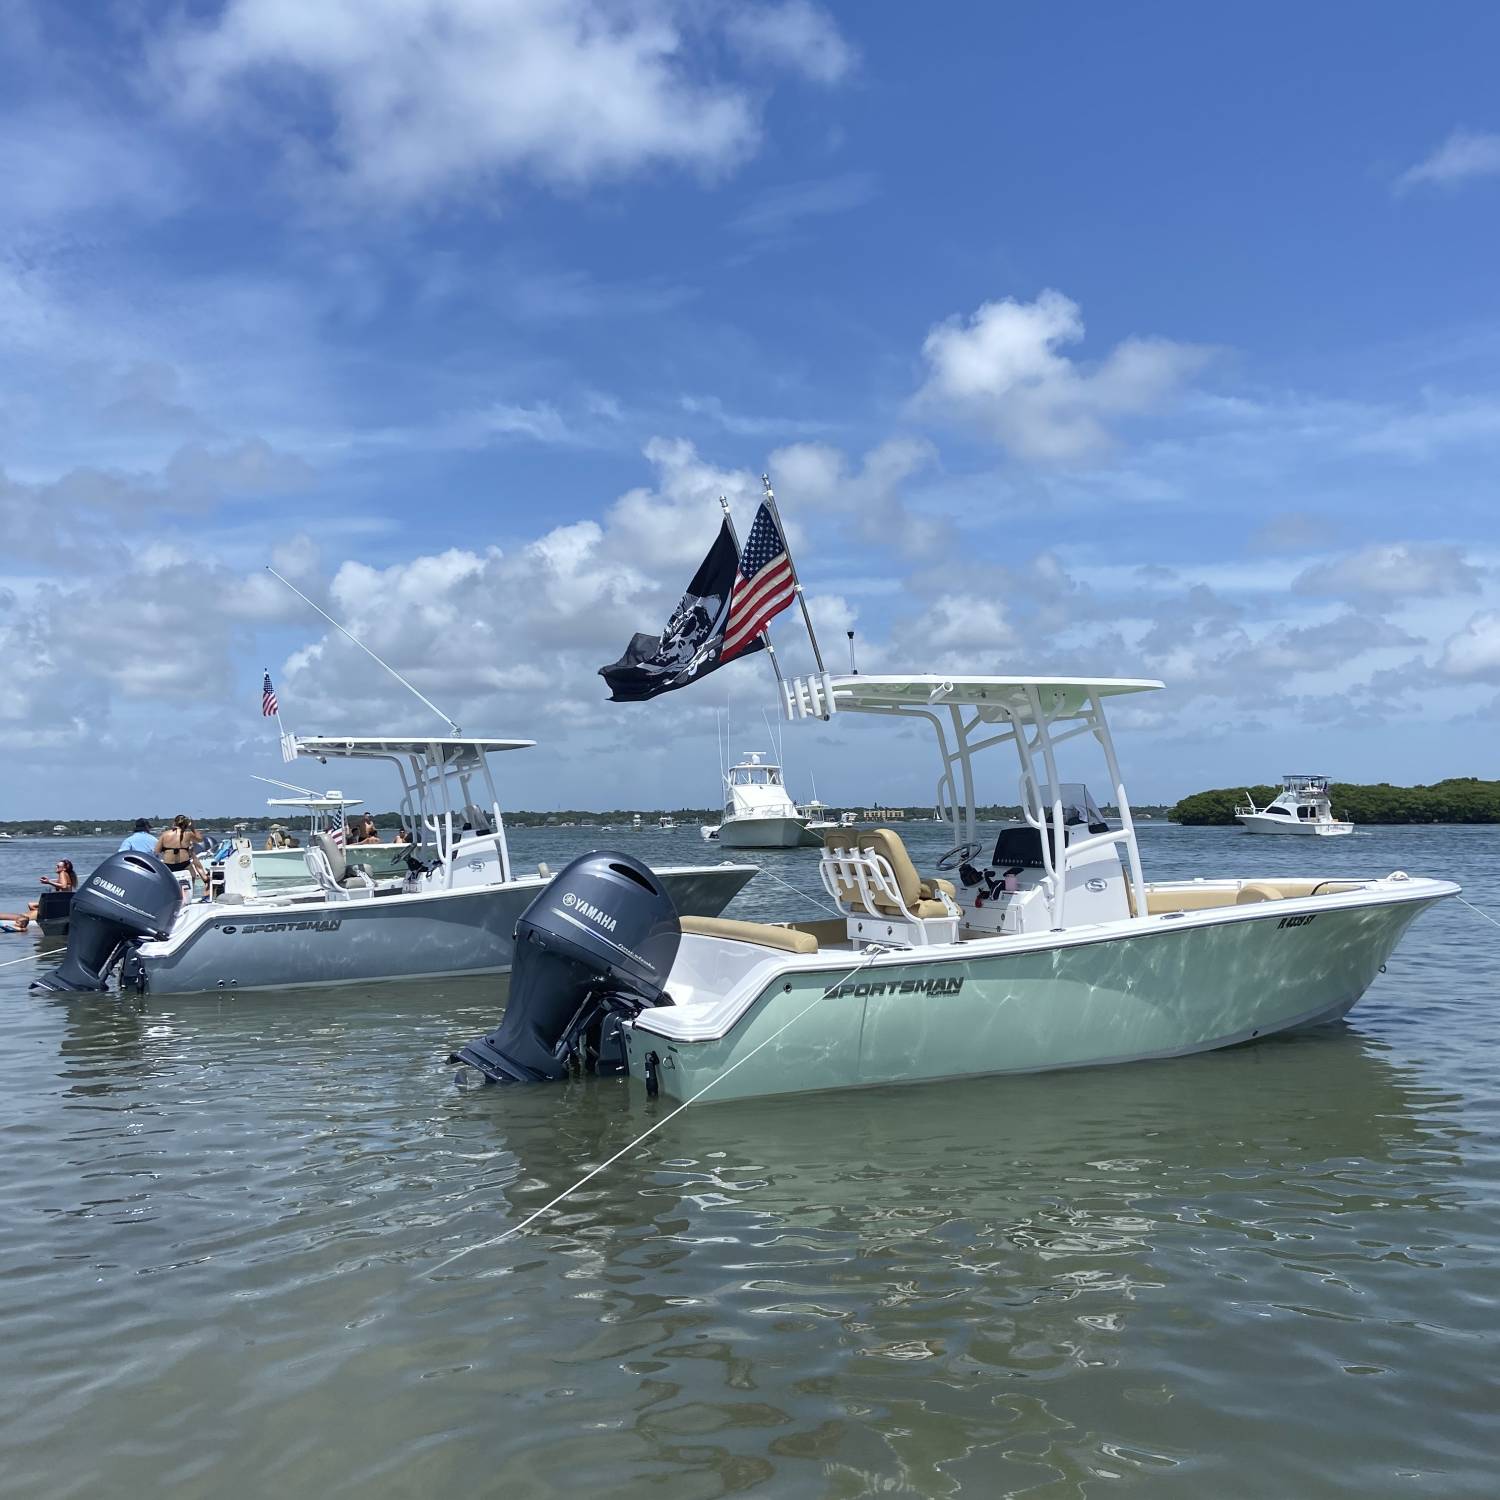 Title: 2 Sportsman’s at the sandbar - On board their Sportsman Heritage 211 Center Console - Location: John’s Pass Sand Bar, FL. Participating in the Photo Contest #SportsmanAugust2021